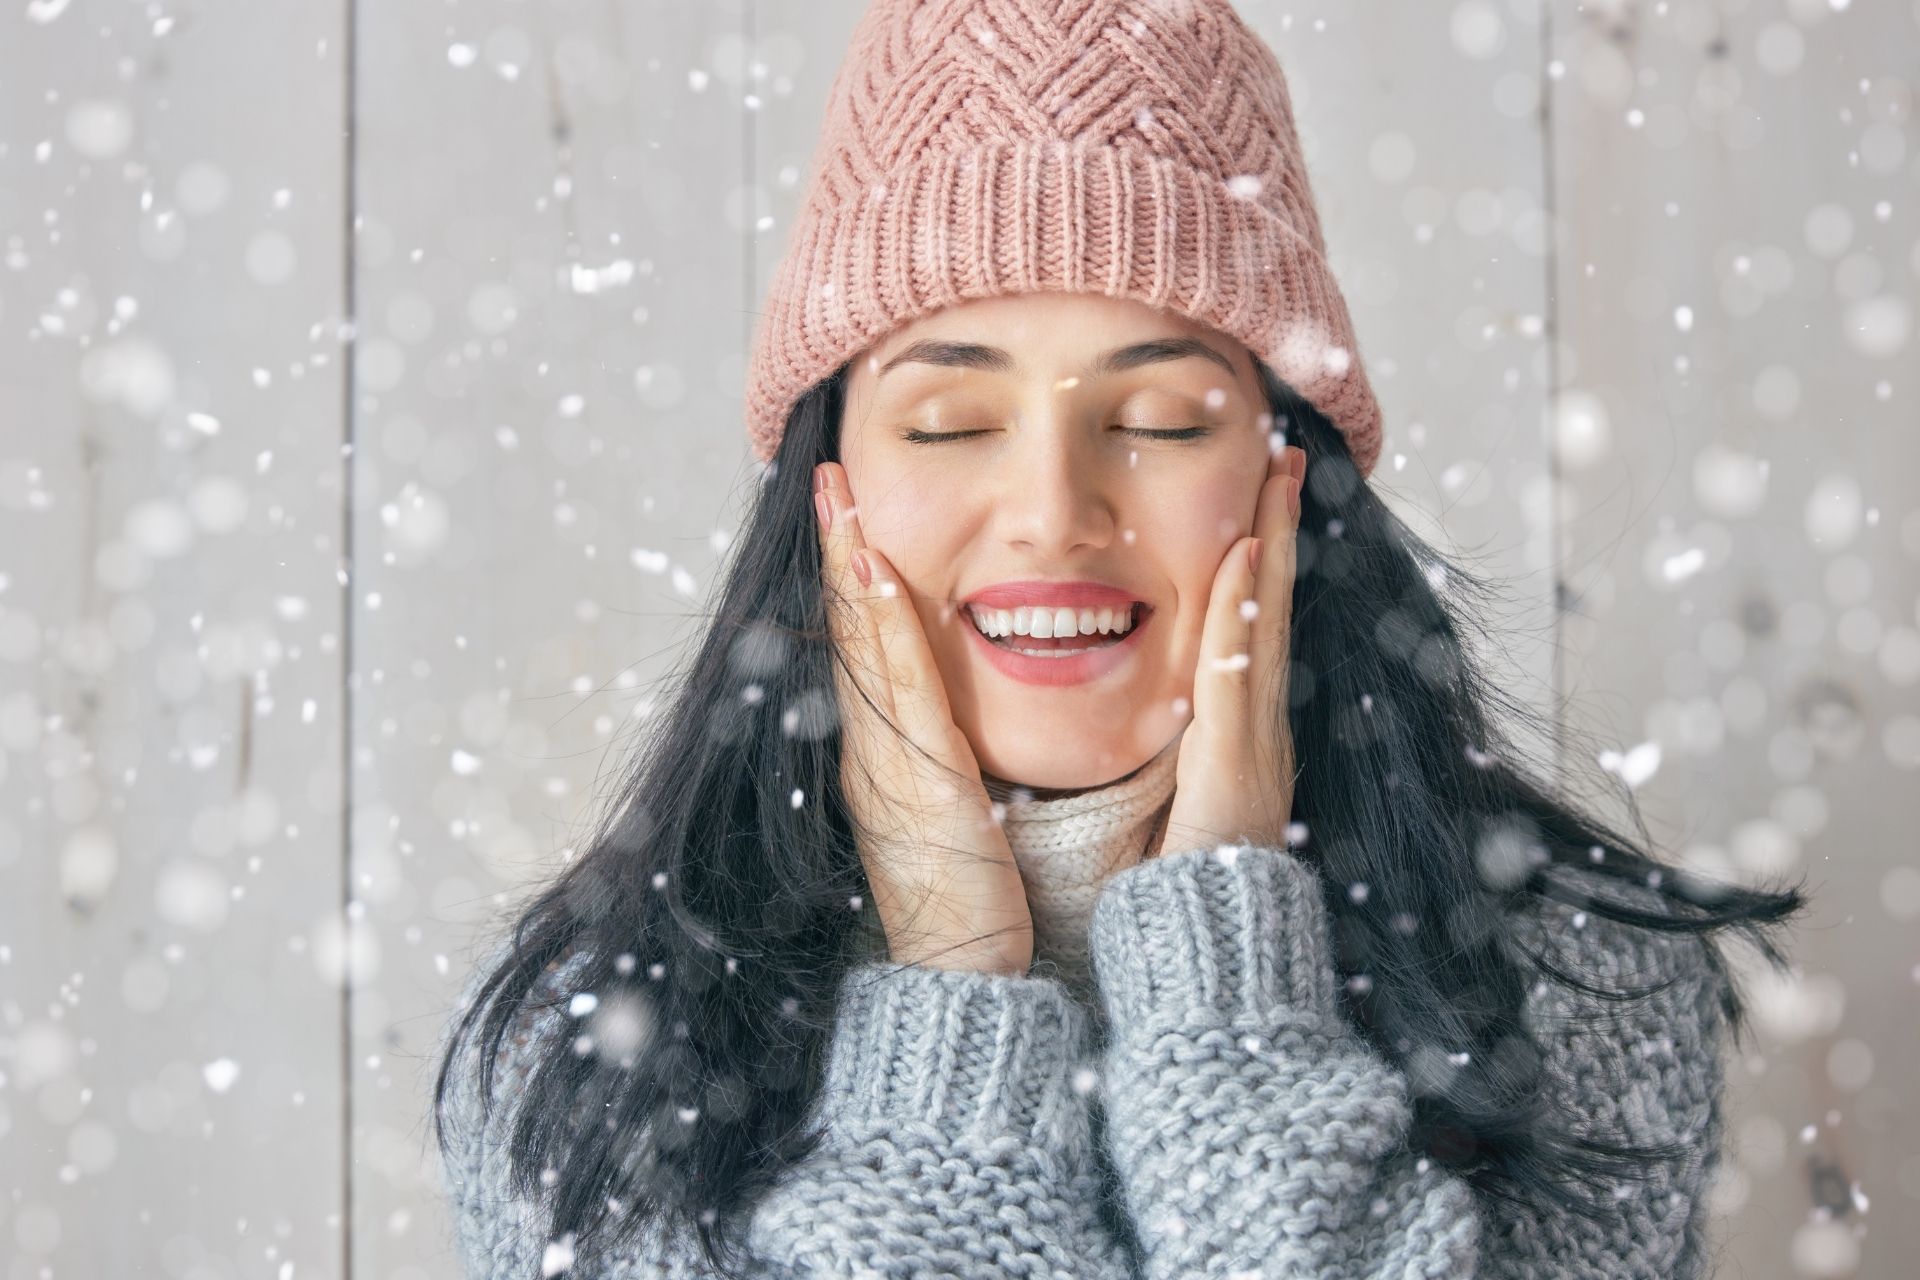 Winter-Proof Your Skin 4 Tips to Keep It Looking Flawless All Season